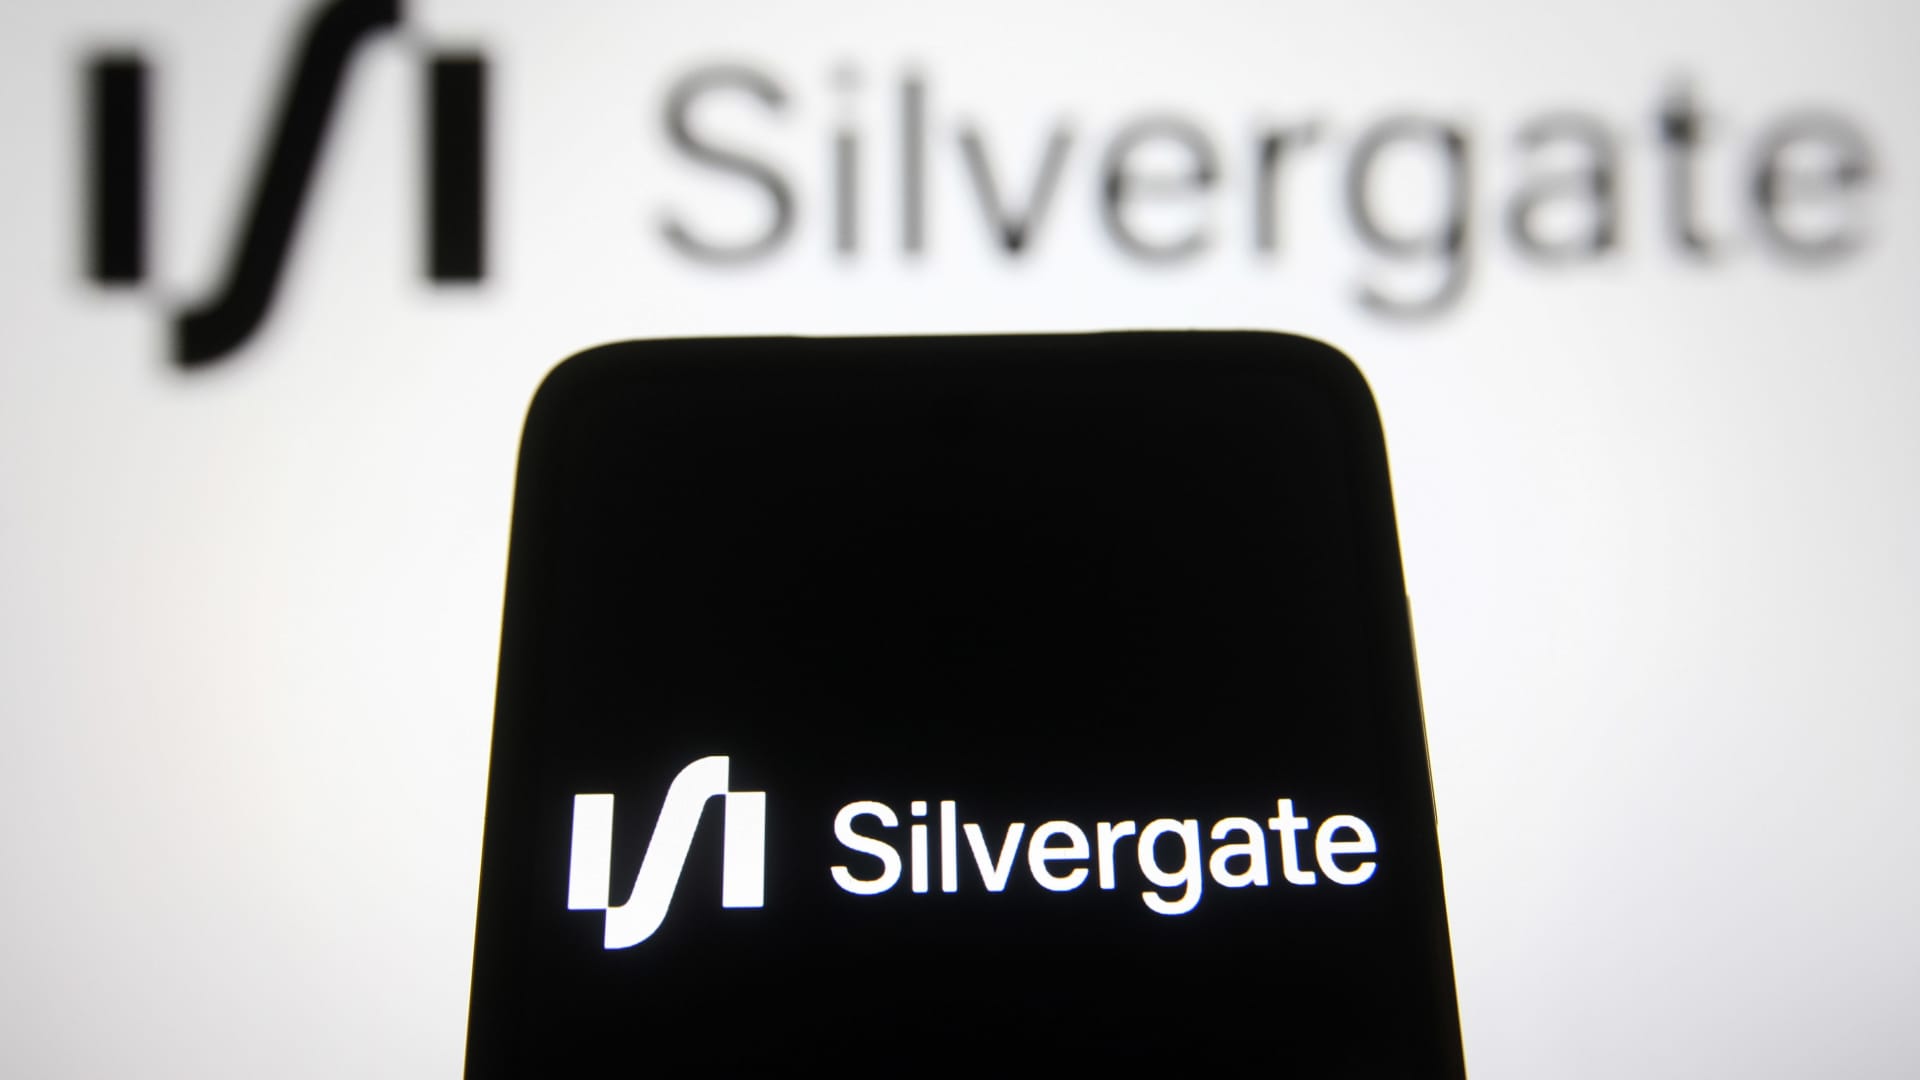 Silvergate Capital tanks more than 40% after crypto bank discloses